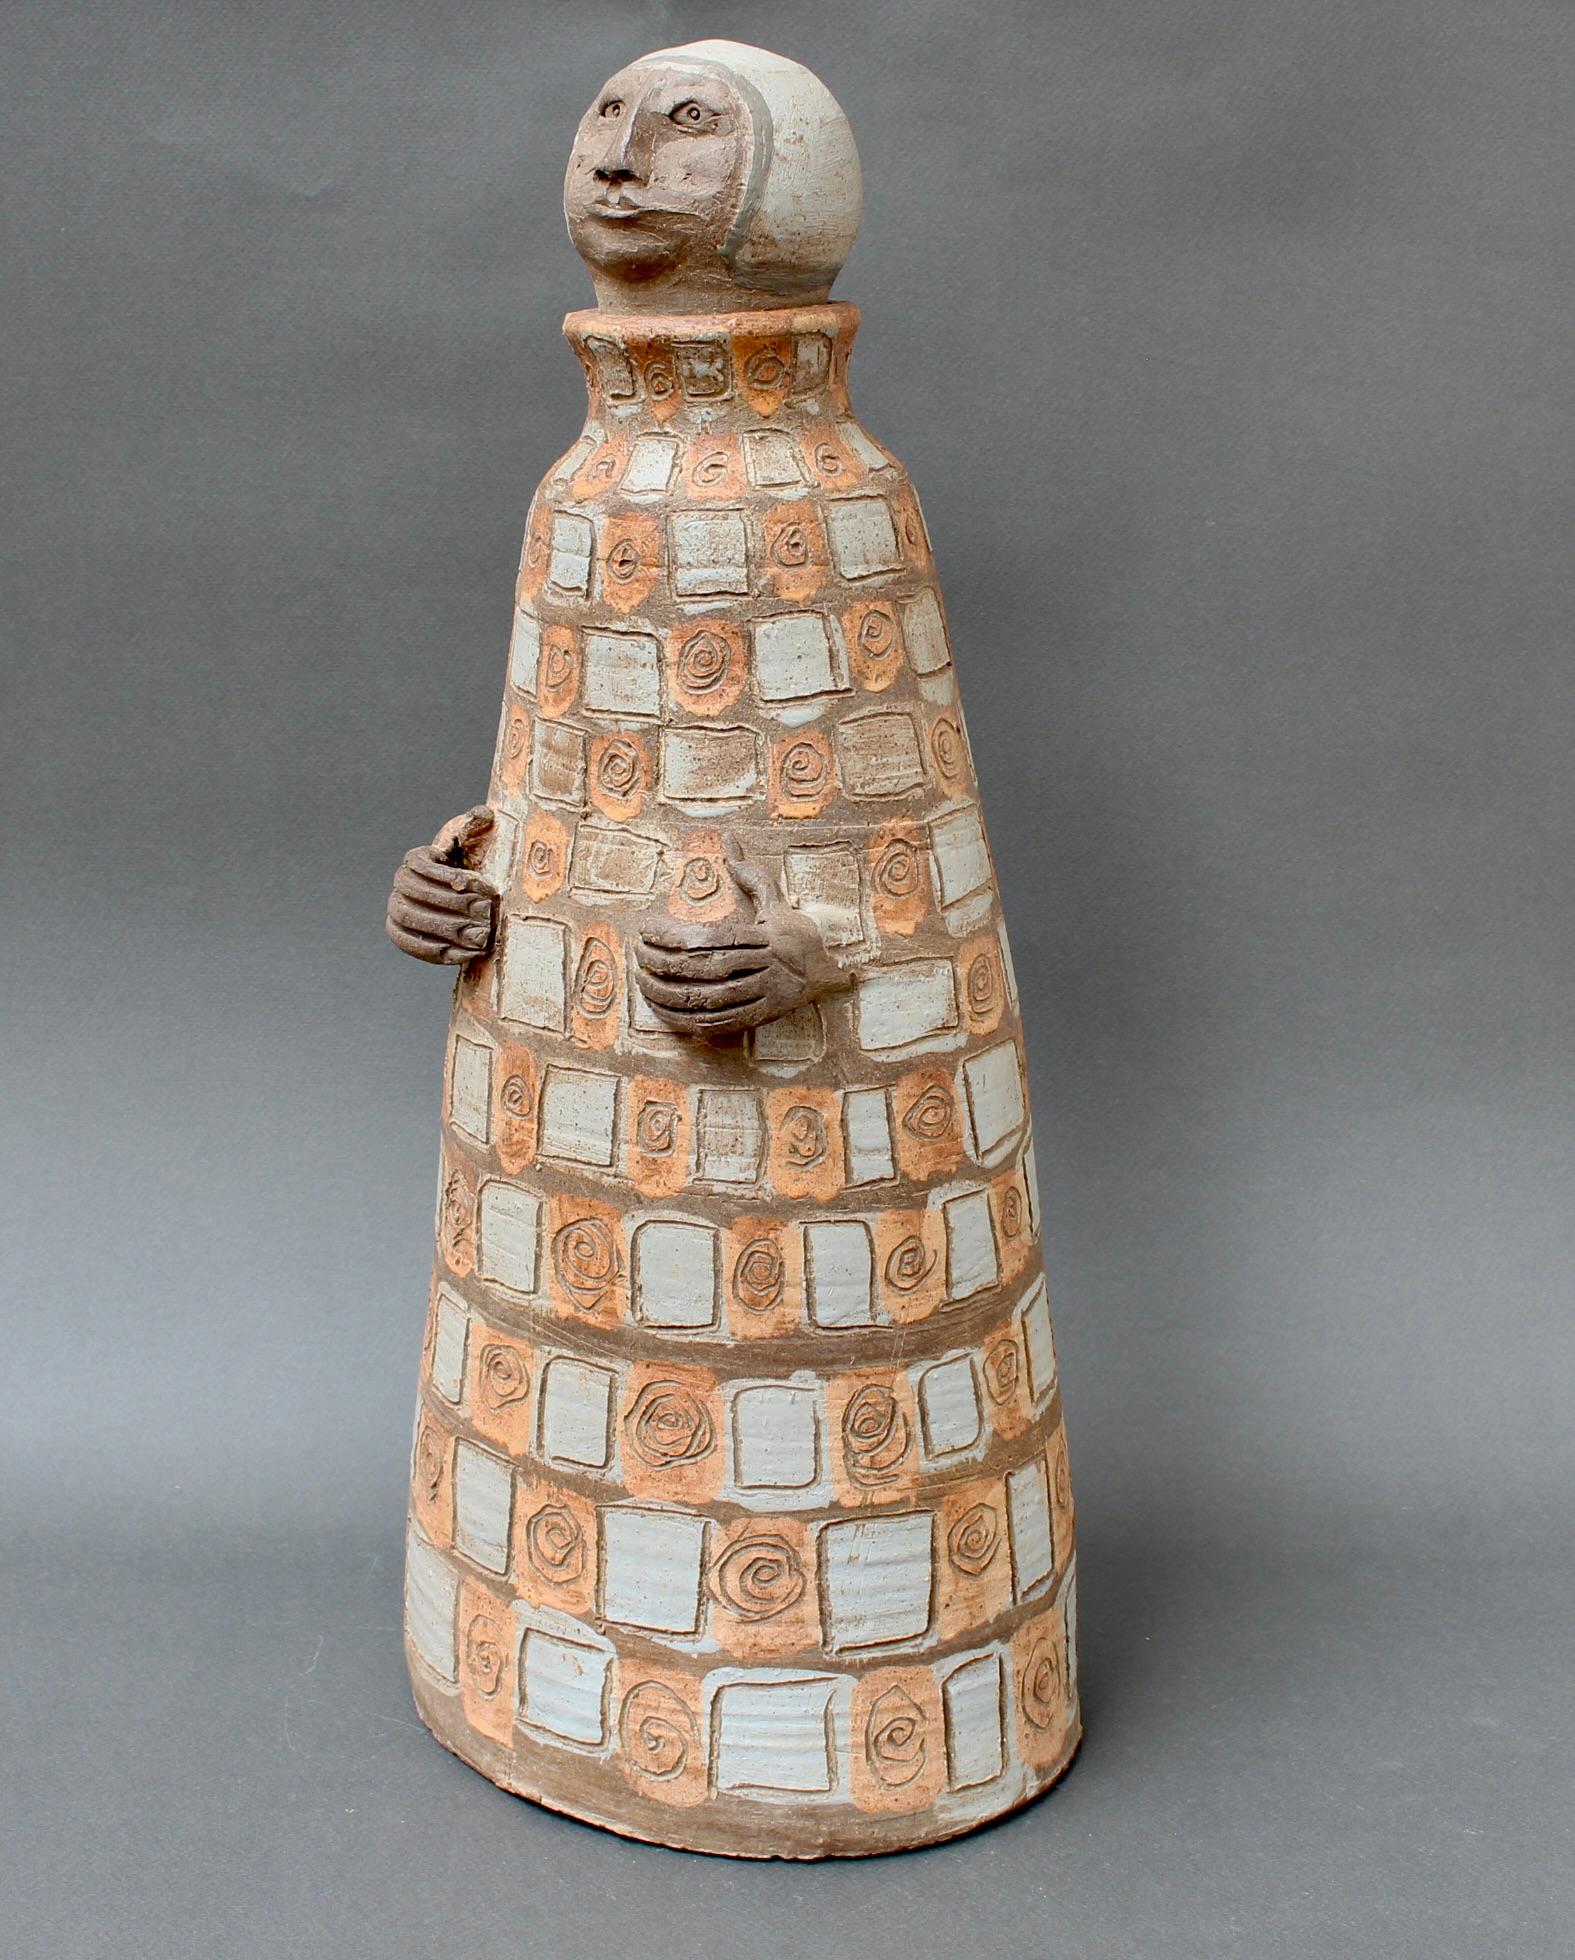 Vintage French earthenware sculpture of a man, by Albert Thiry (circa 1990s). Not one of his usual subjects, ceramicist Thiry created this figure wearing the garb and cap of a medieval monk, his hands placidly held at the waist. On the robe is an